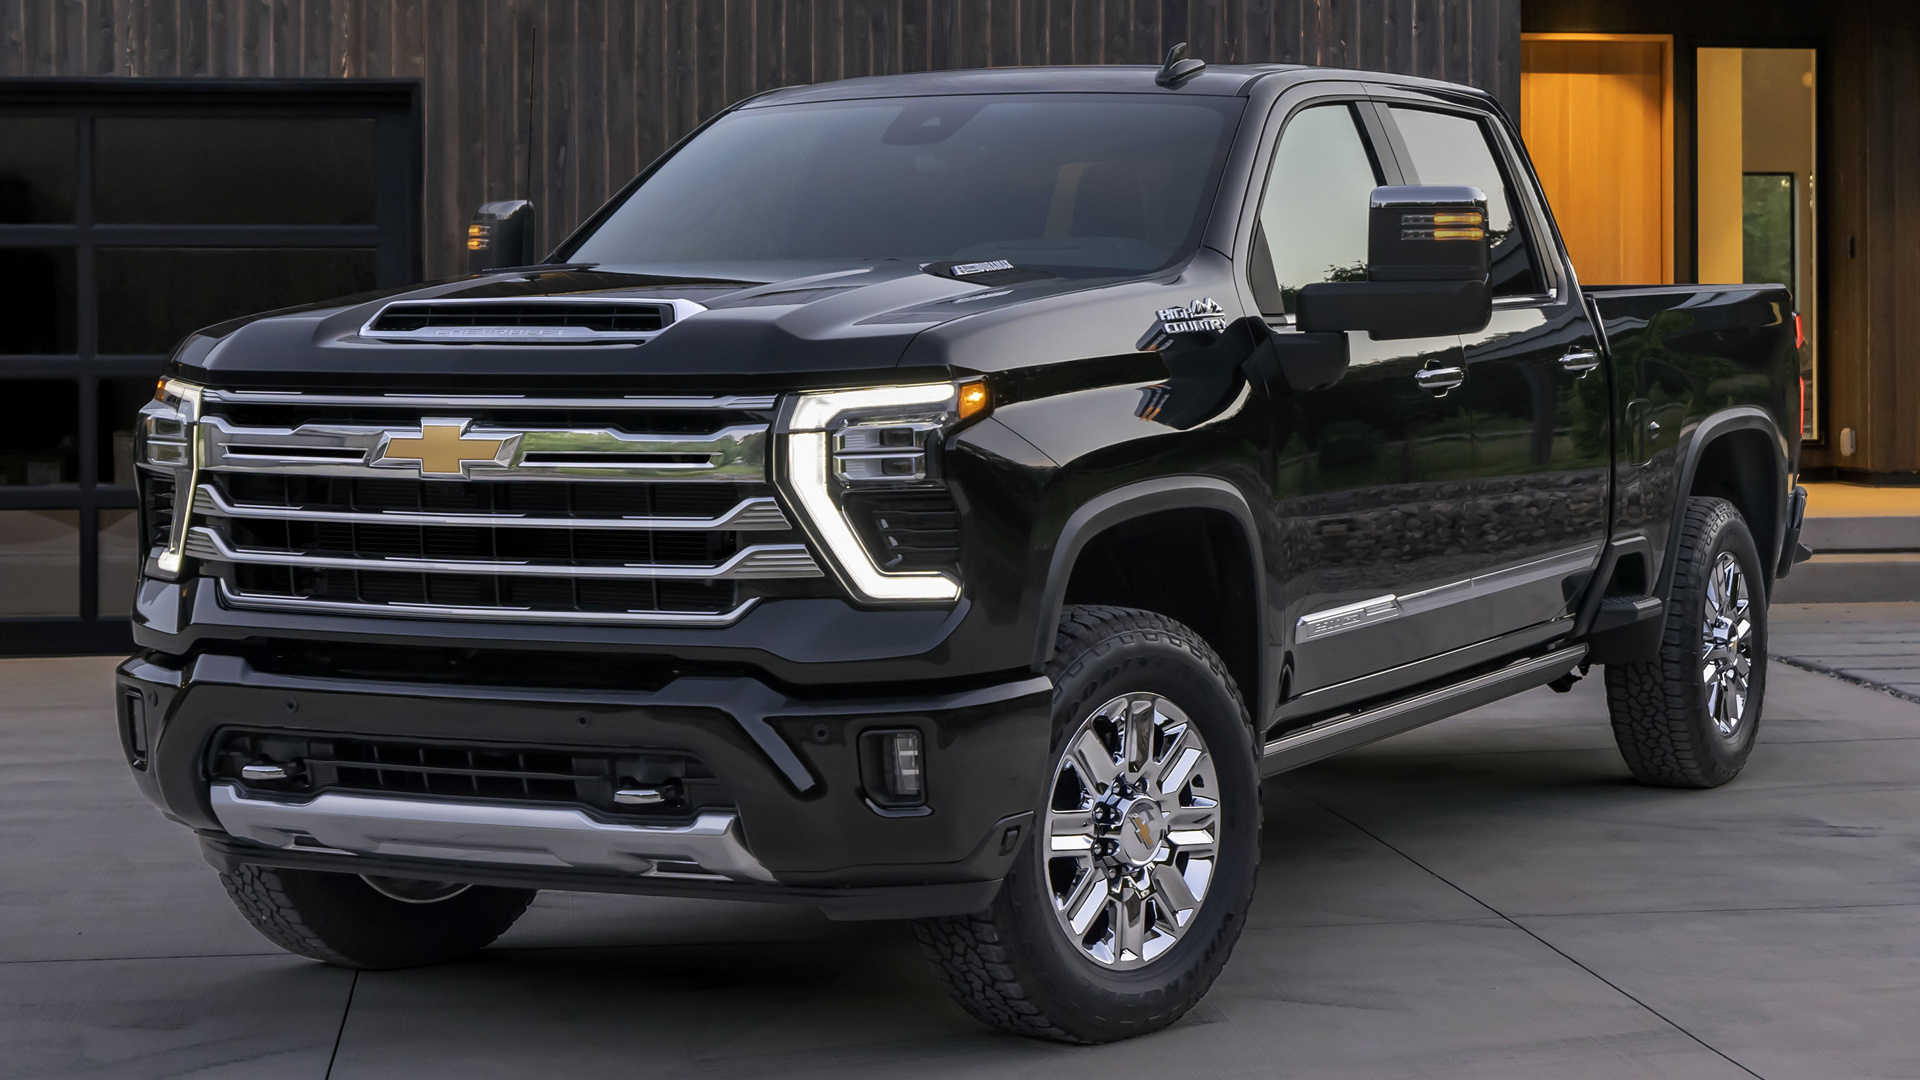 2024 Chevrolet Silverado 2500 HD High Country Crew Cab Wallpapers and